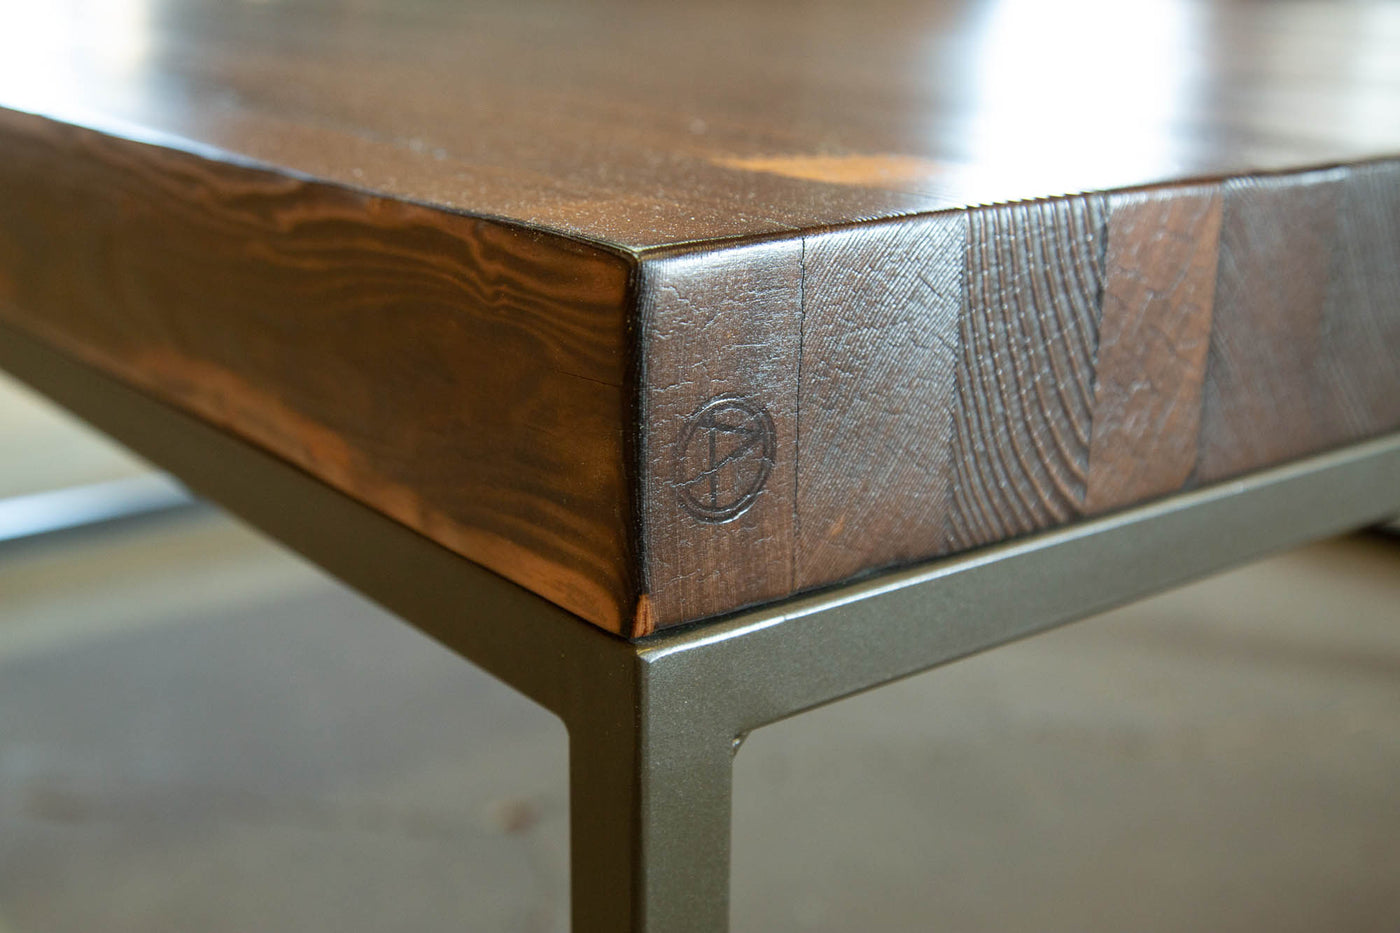 The Azniv Coffee Table - Parkman Woodworks Store